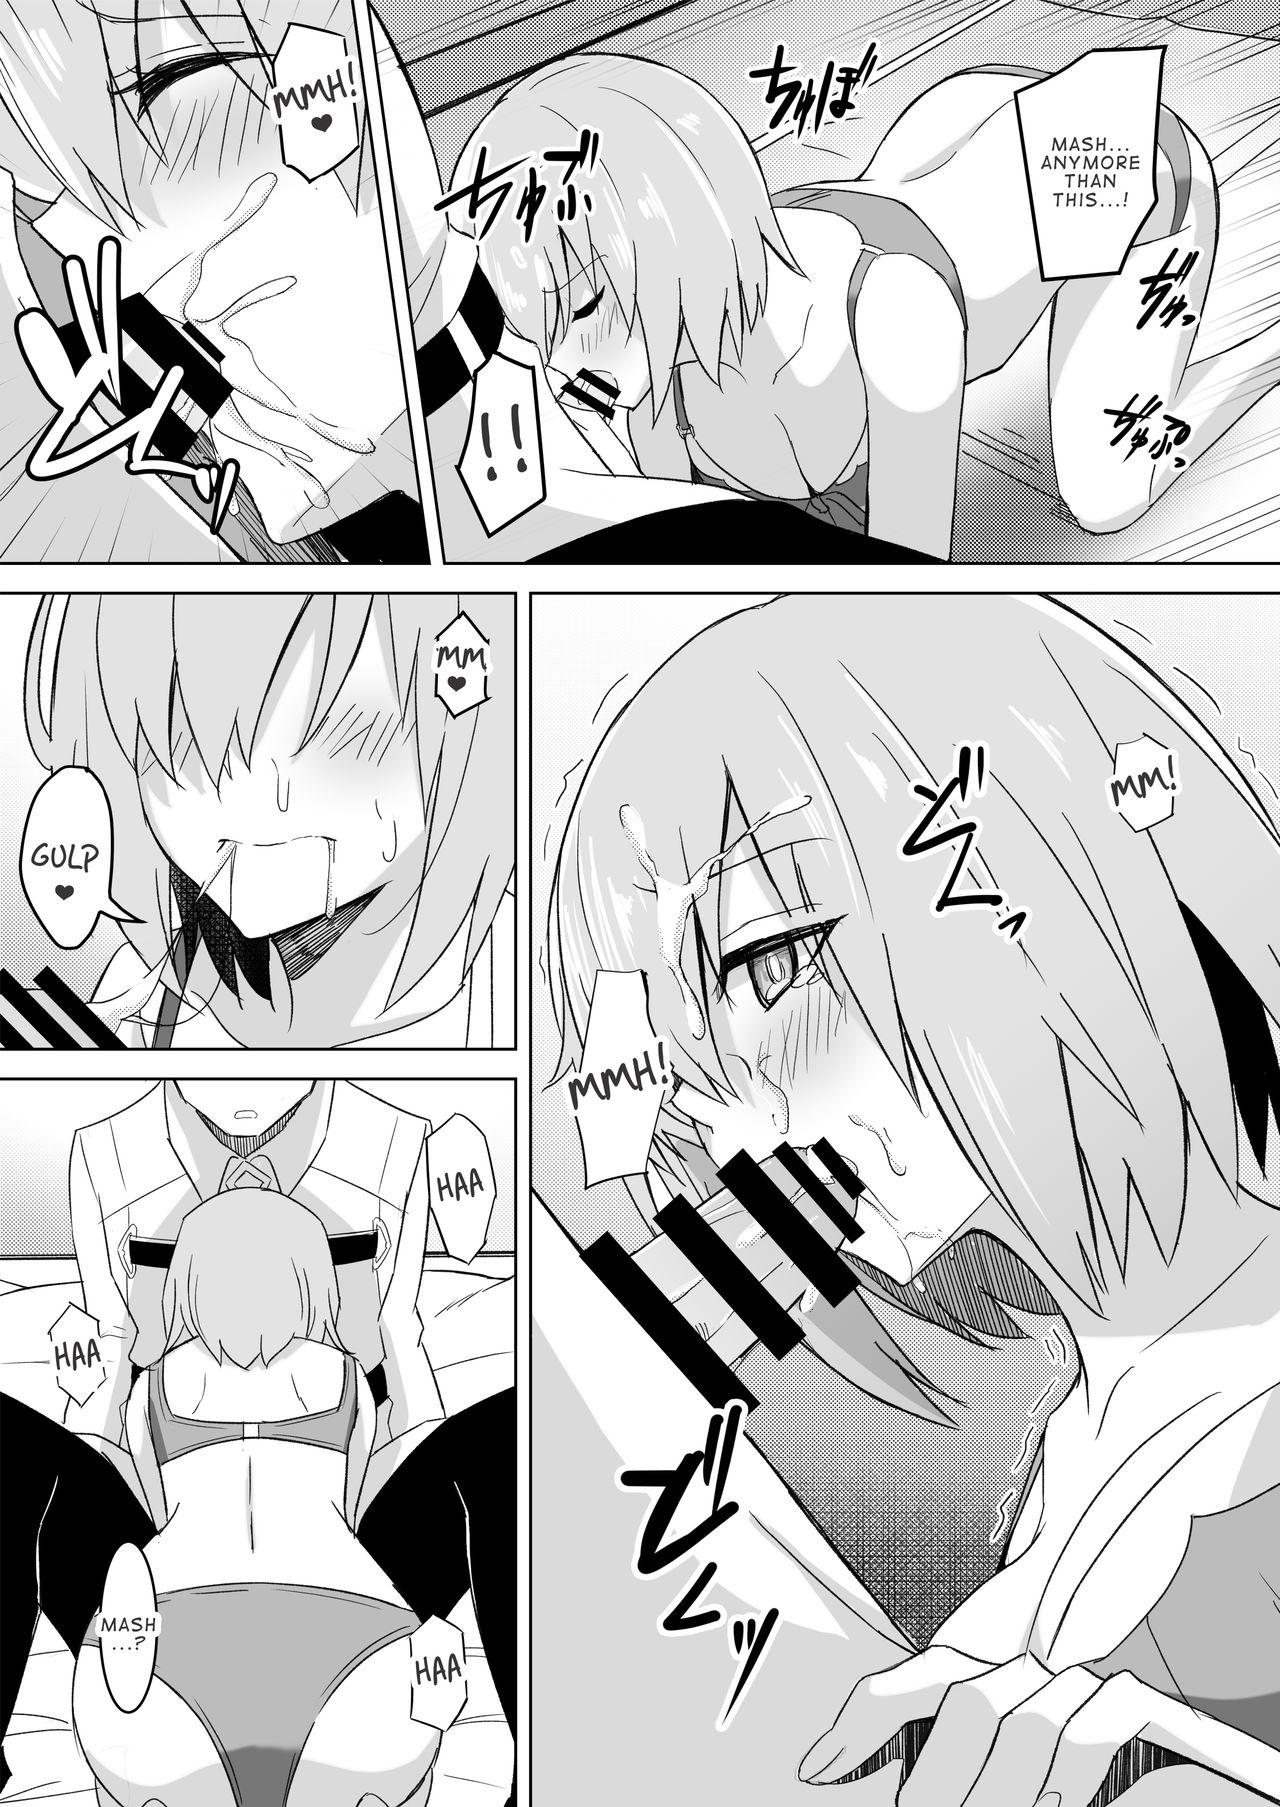 Fishnet Mash Was Jealousy - Fate grand order Ass Fucked - Page 8